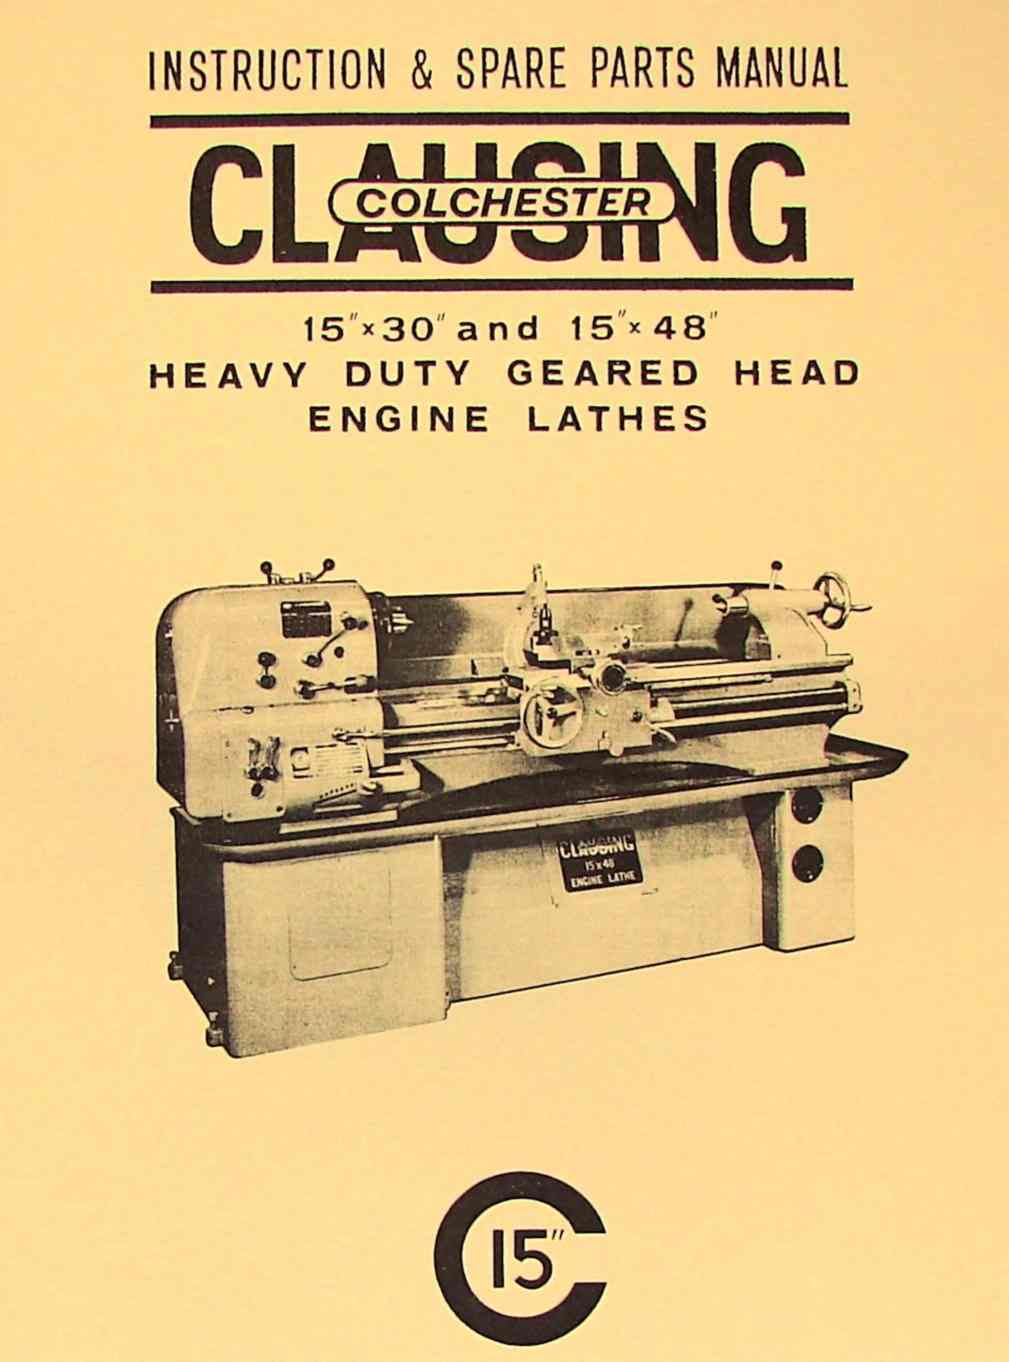 Clausing 15",Colchester Instructions and Parts Lists Manual 